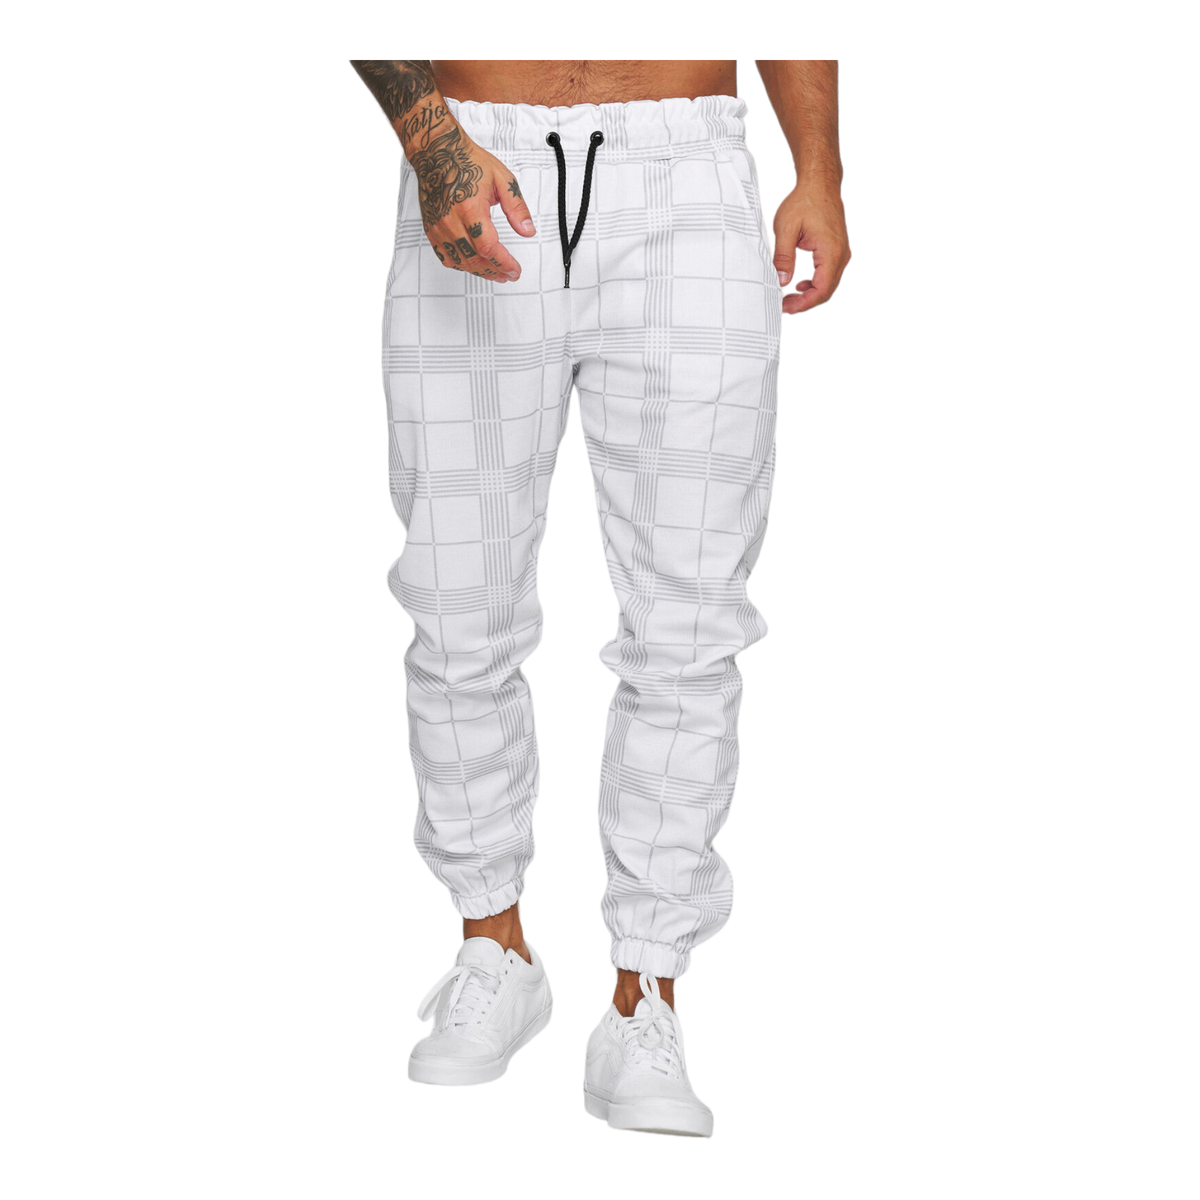 APEY - Joggers Checkered Men's Joggers Casual Tapered Cargo Pants ...